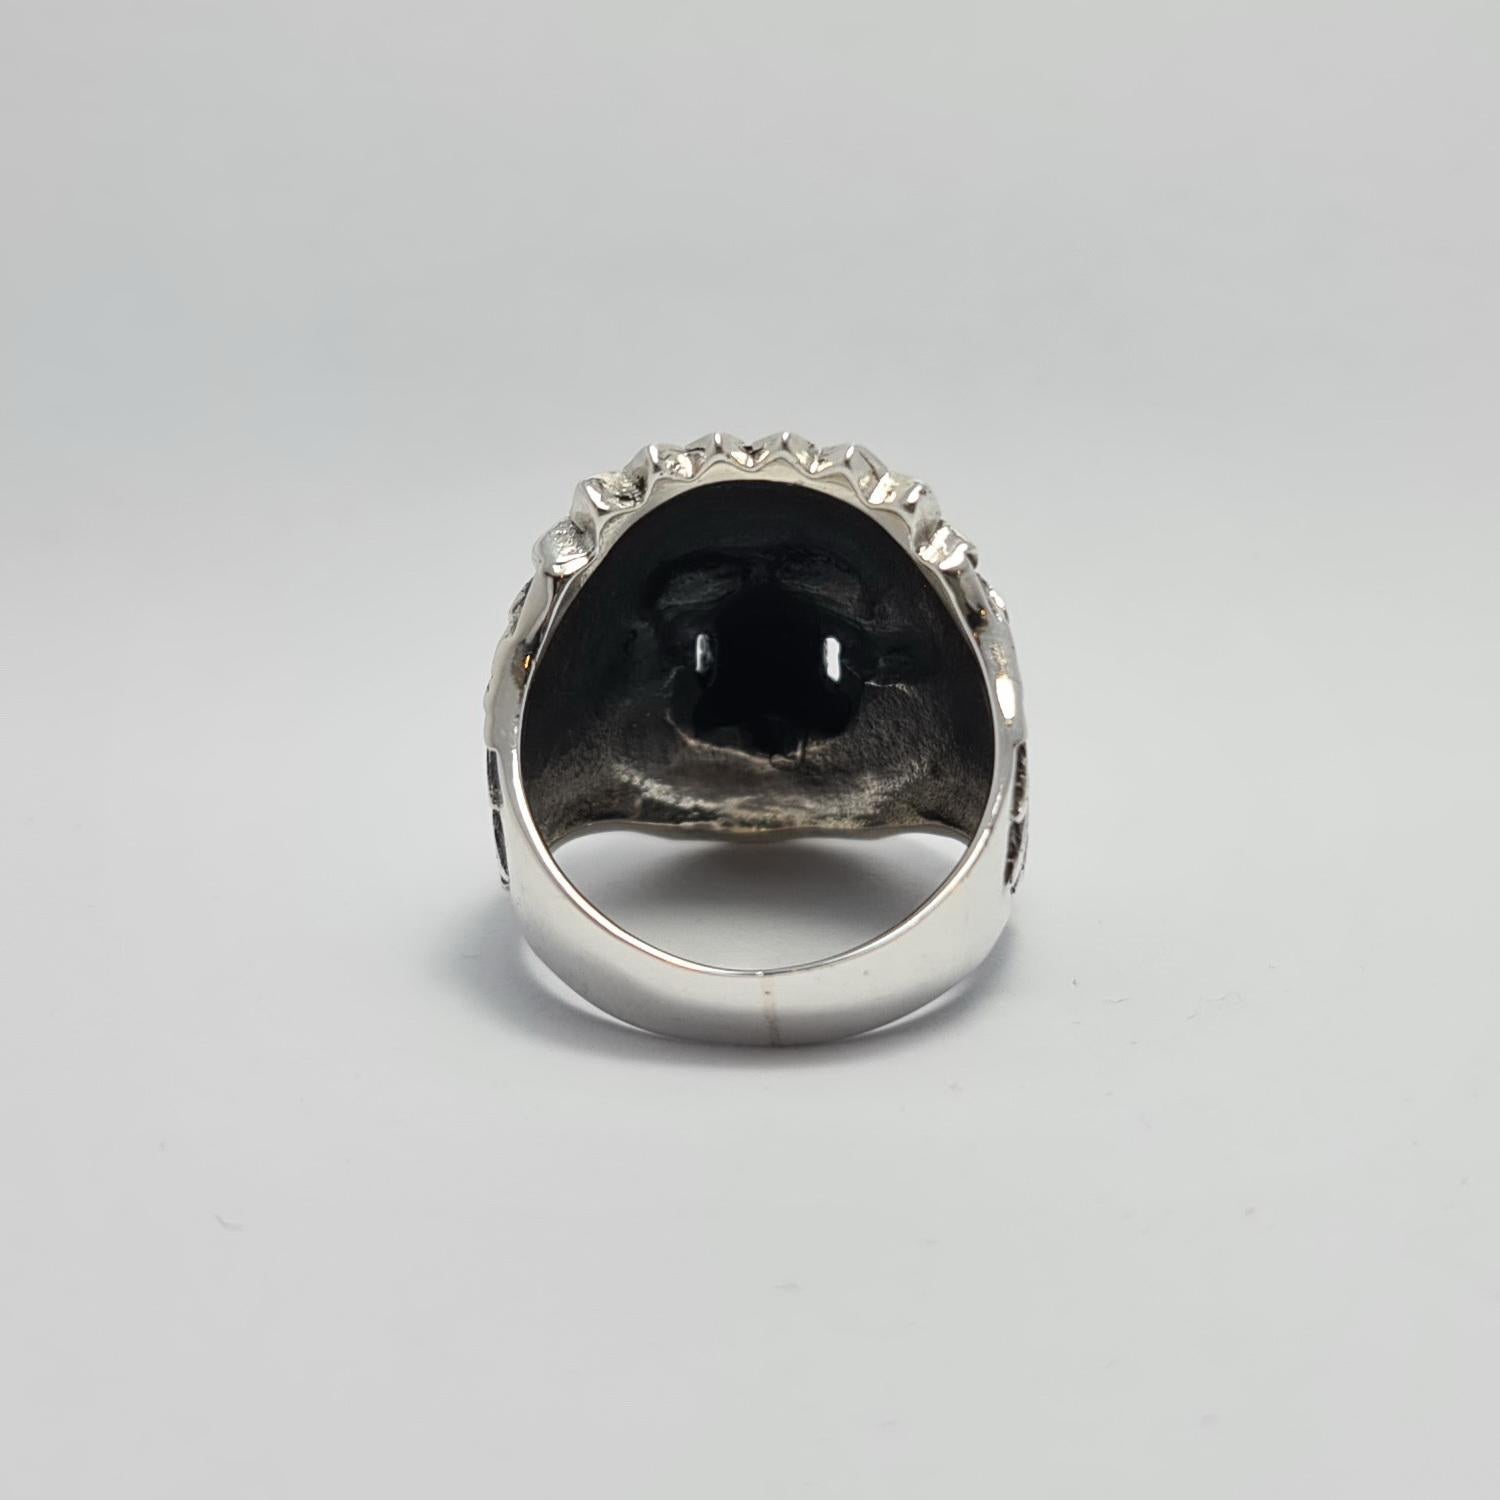 Round Cut Garnet Eyes American Indian Skull Tribal Chief Warrior Ring Sterling Silver 925 For Sale